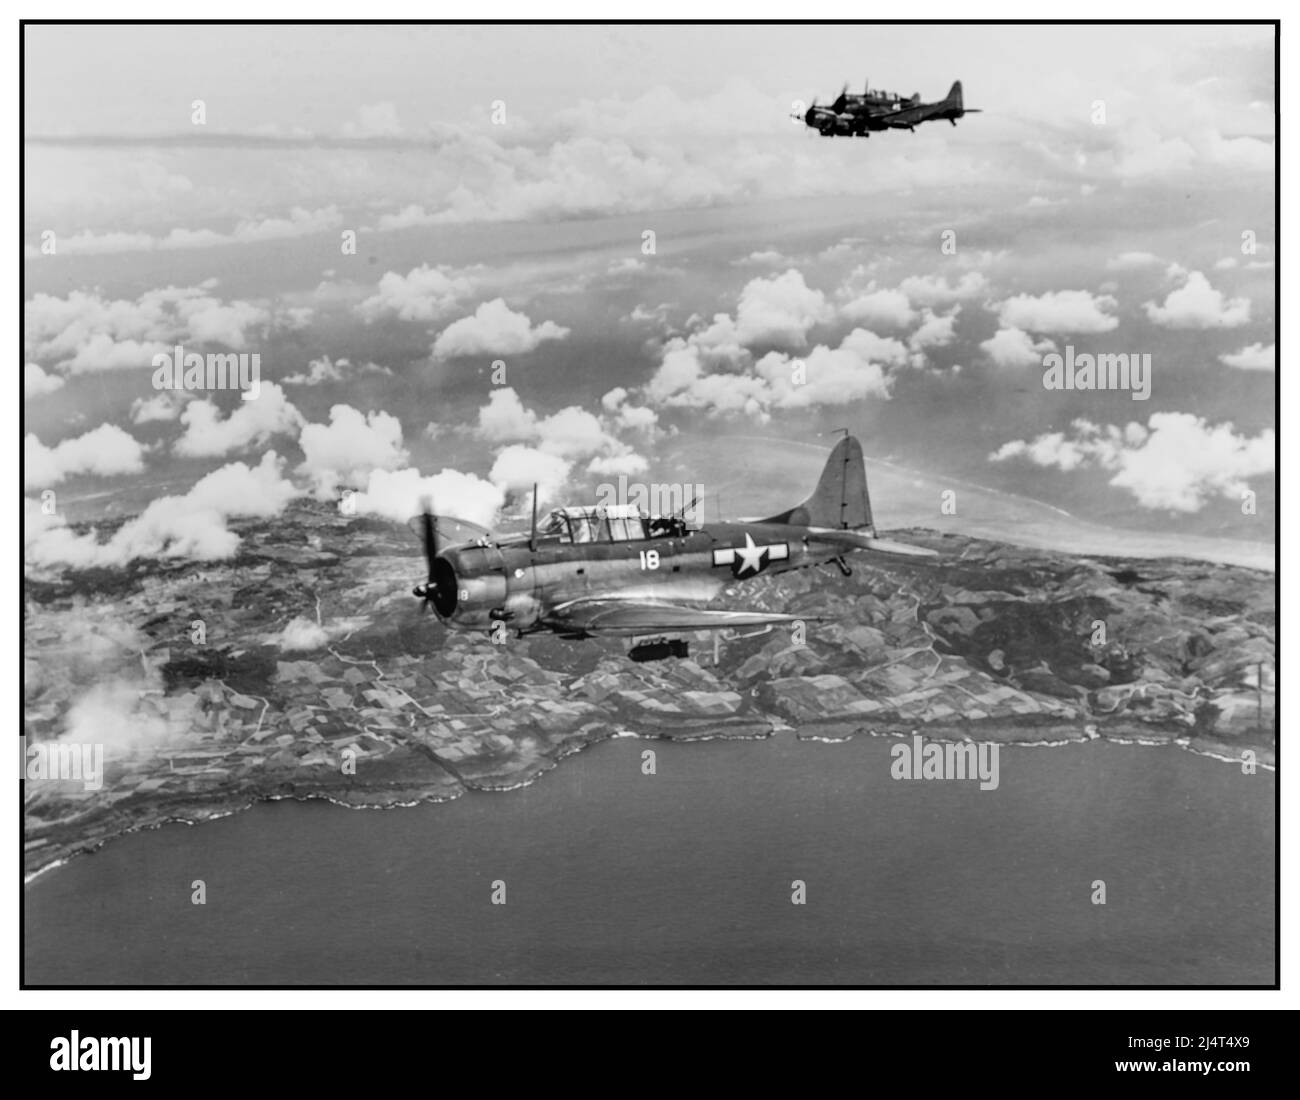 WW2  U.S. Navy Douglas SBD-5 Dauntless dive bombers of Bombing Squadron 16 (VB-16), Carrier Air Group 16, from the aircraft carrier USS Lexington (CV-16), over Saipan on their way to bomb Aslito airfield, 15 June 1944. Stock Photo